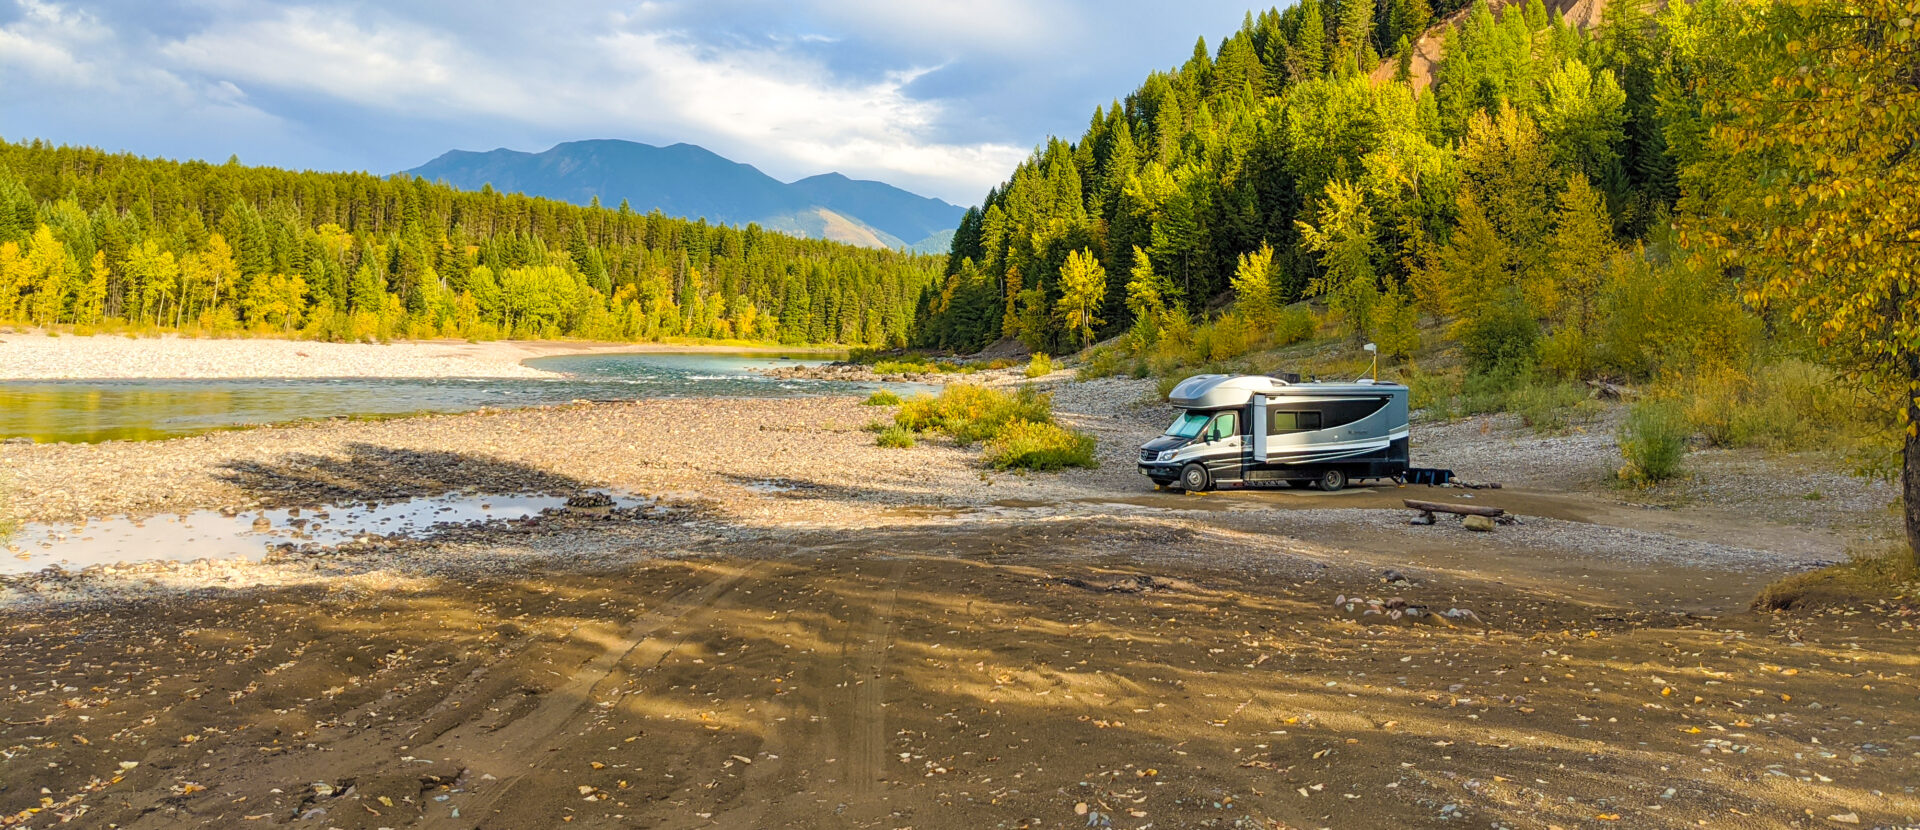 Video: 5 Amazing Places to Camp for Free in the Western U.S.